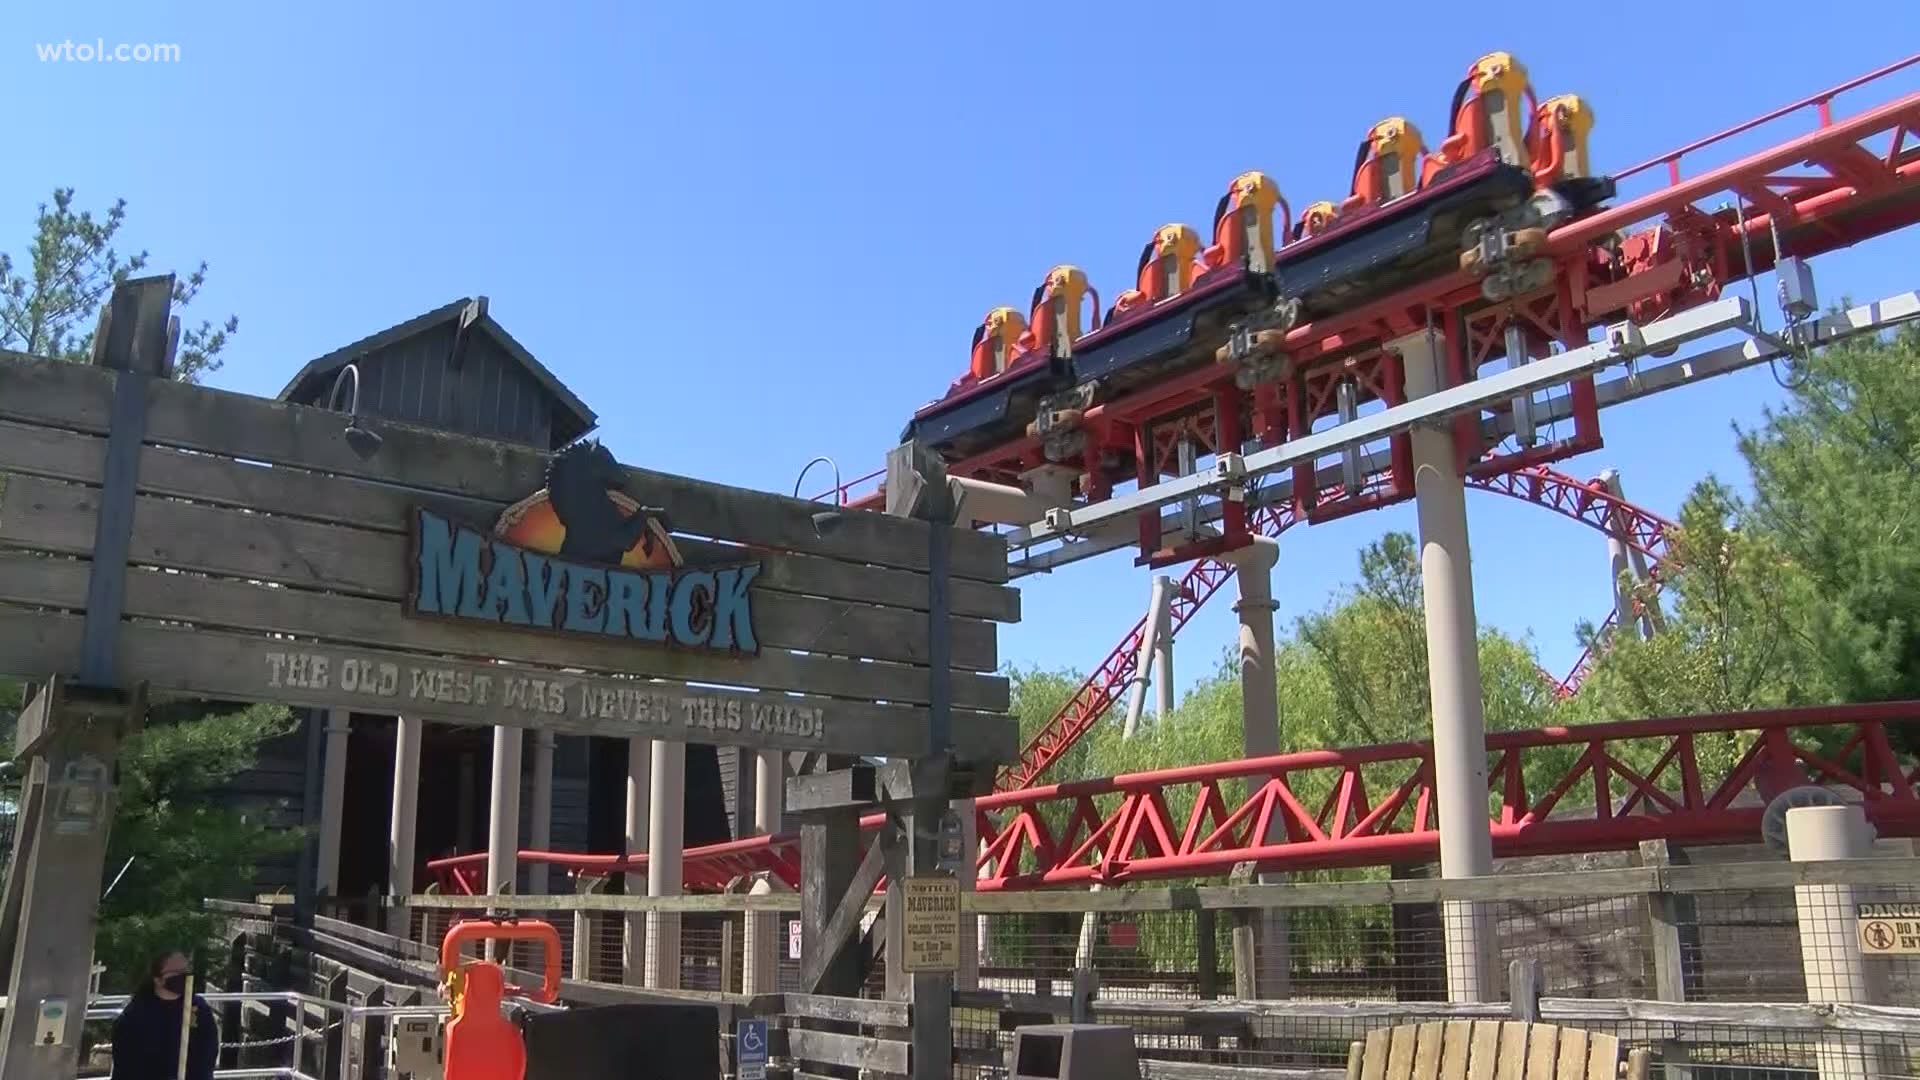 This year marks Cedar Point's 151st season, but because of the shortened 2020 season due to COVID-19, the park will celebrate its 150th anniversary in July.